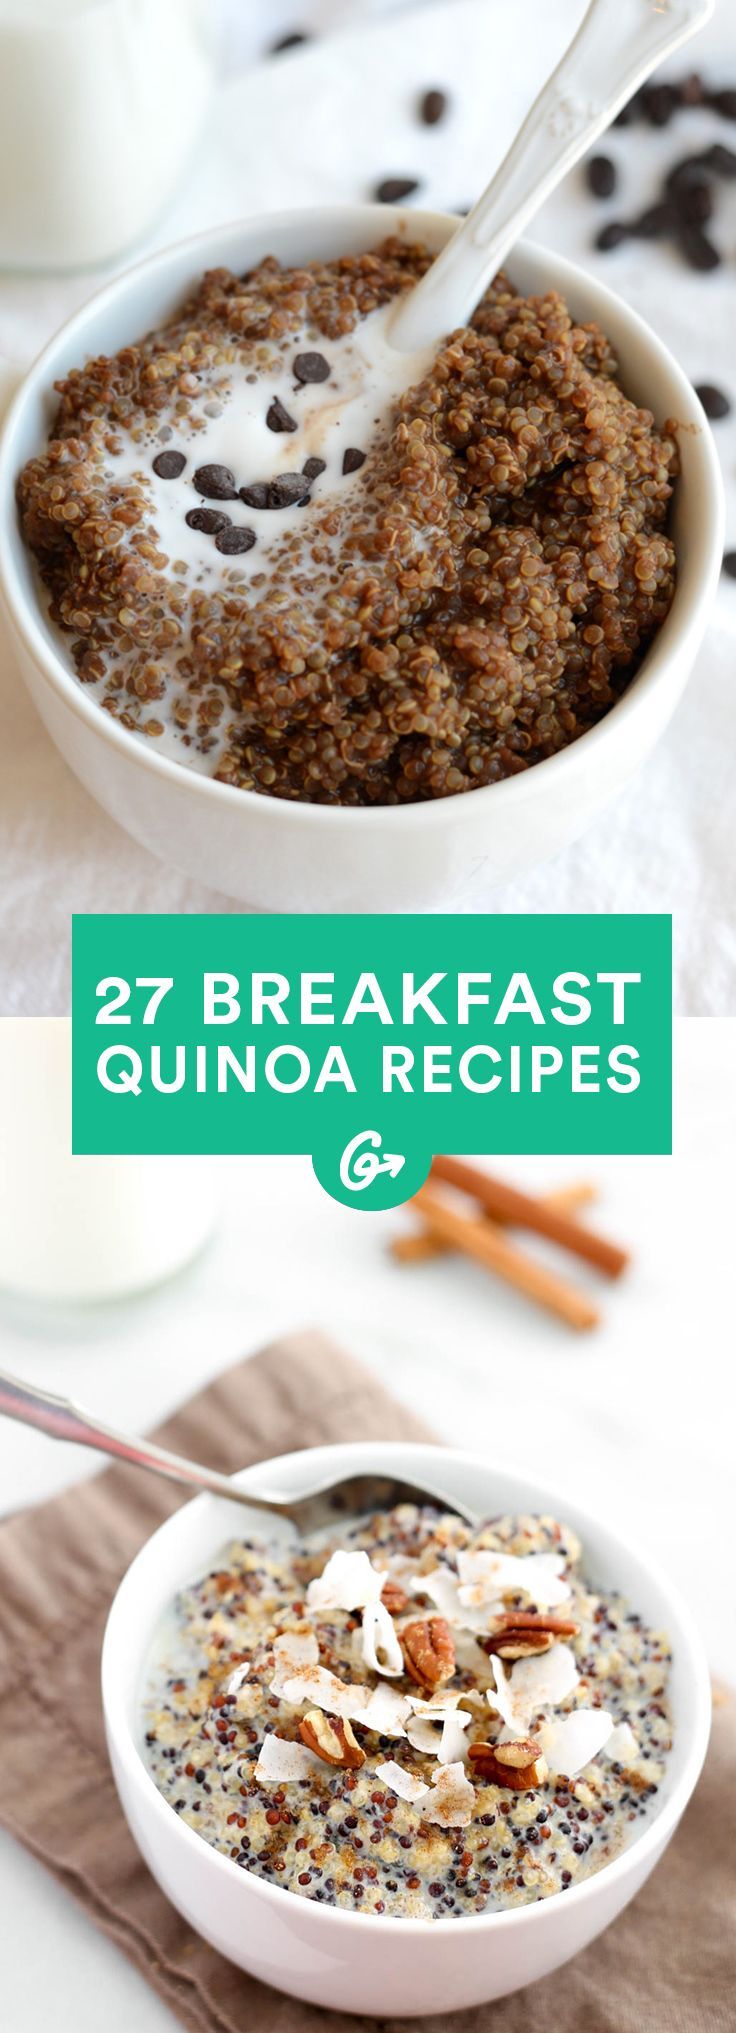 27 Breakfast Quinoa Recipes That’ll Make You Forget All About Oatmeal -   21 clean quinoa recipes
 ideas